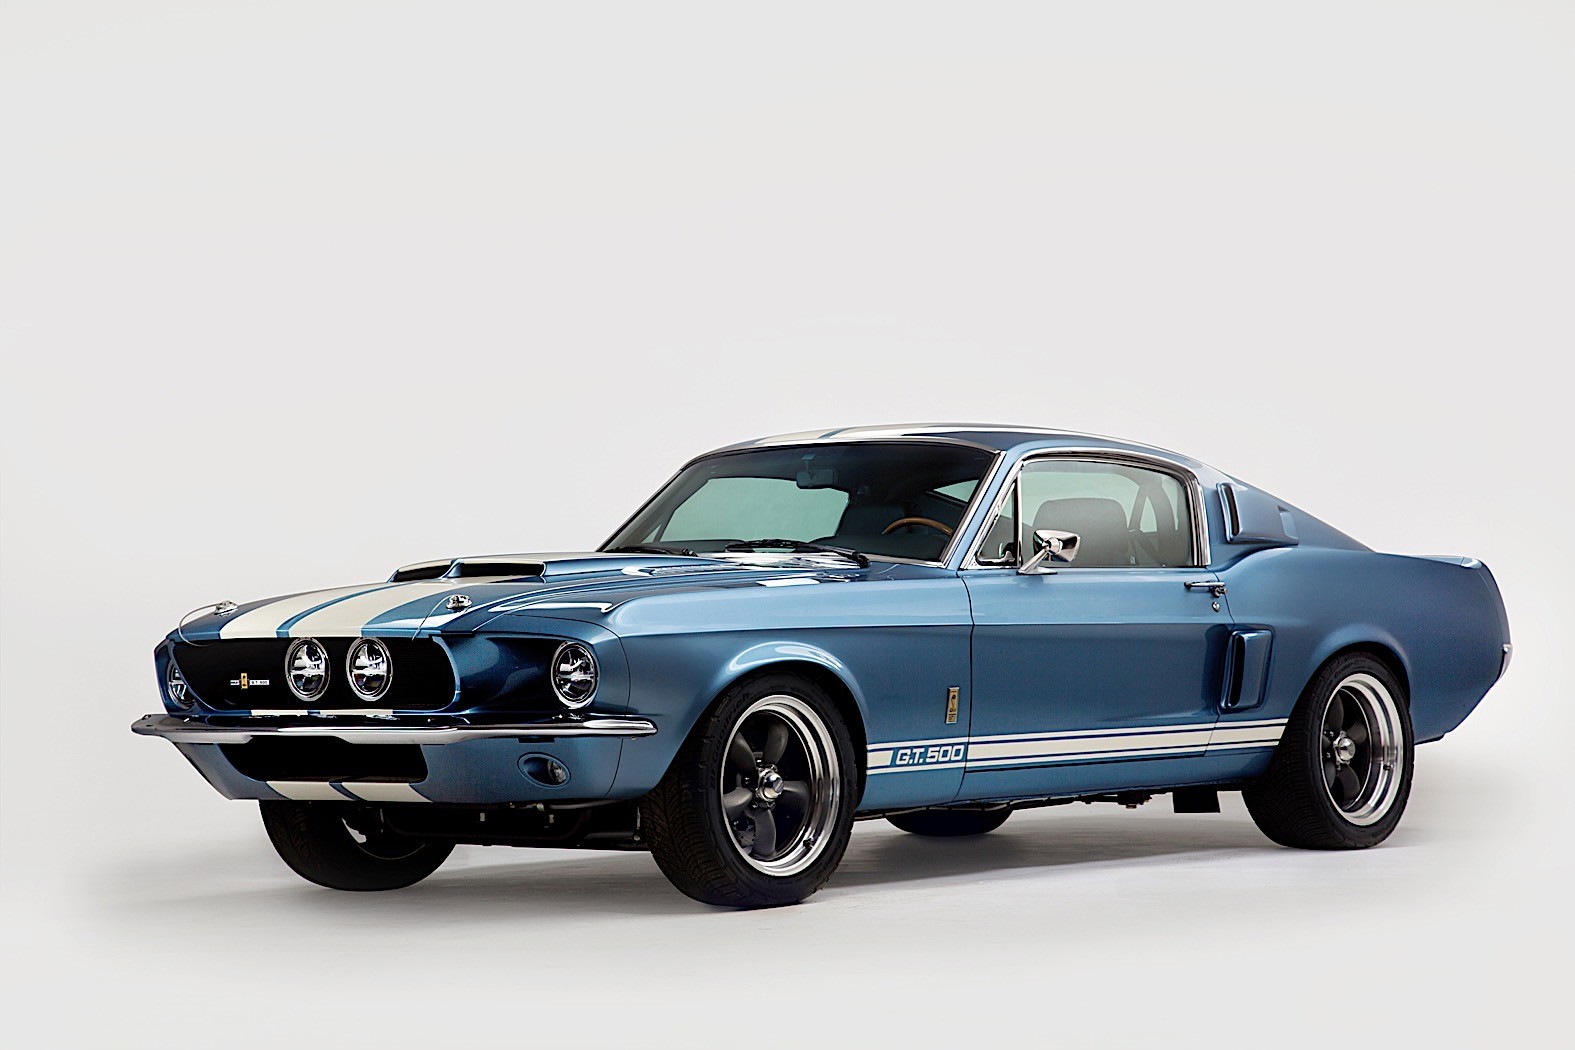 What was the engine in a '67 Shelby G.T. 500 called, exactly?